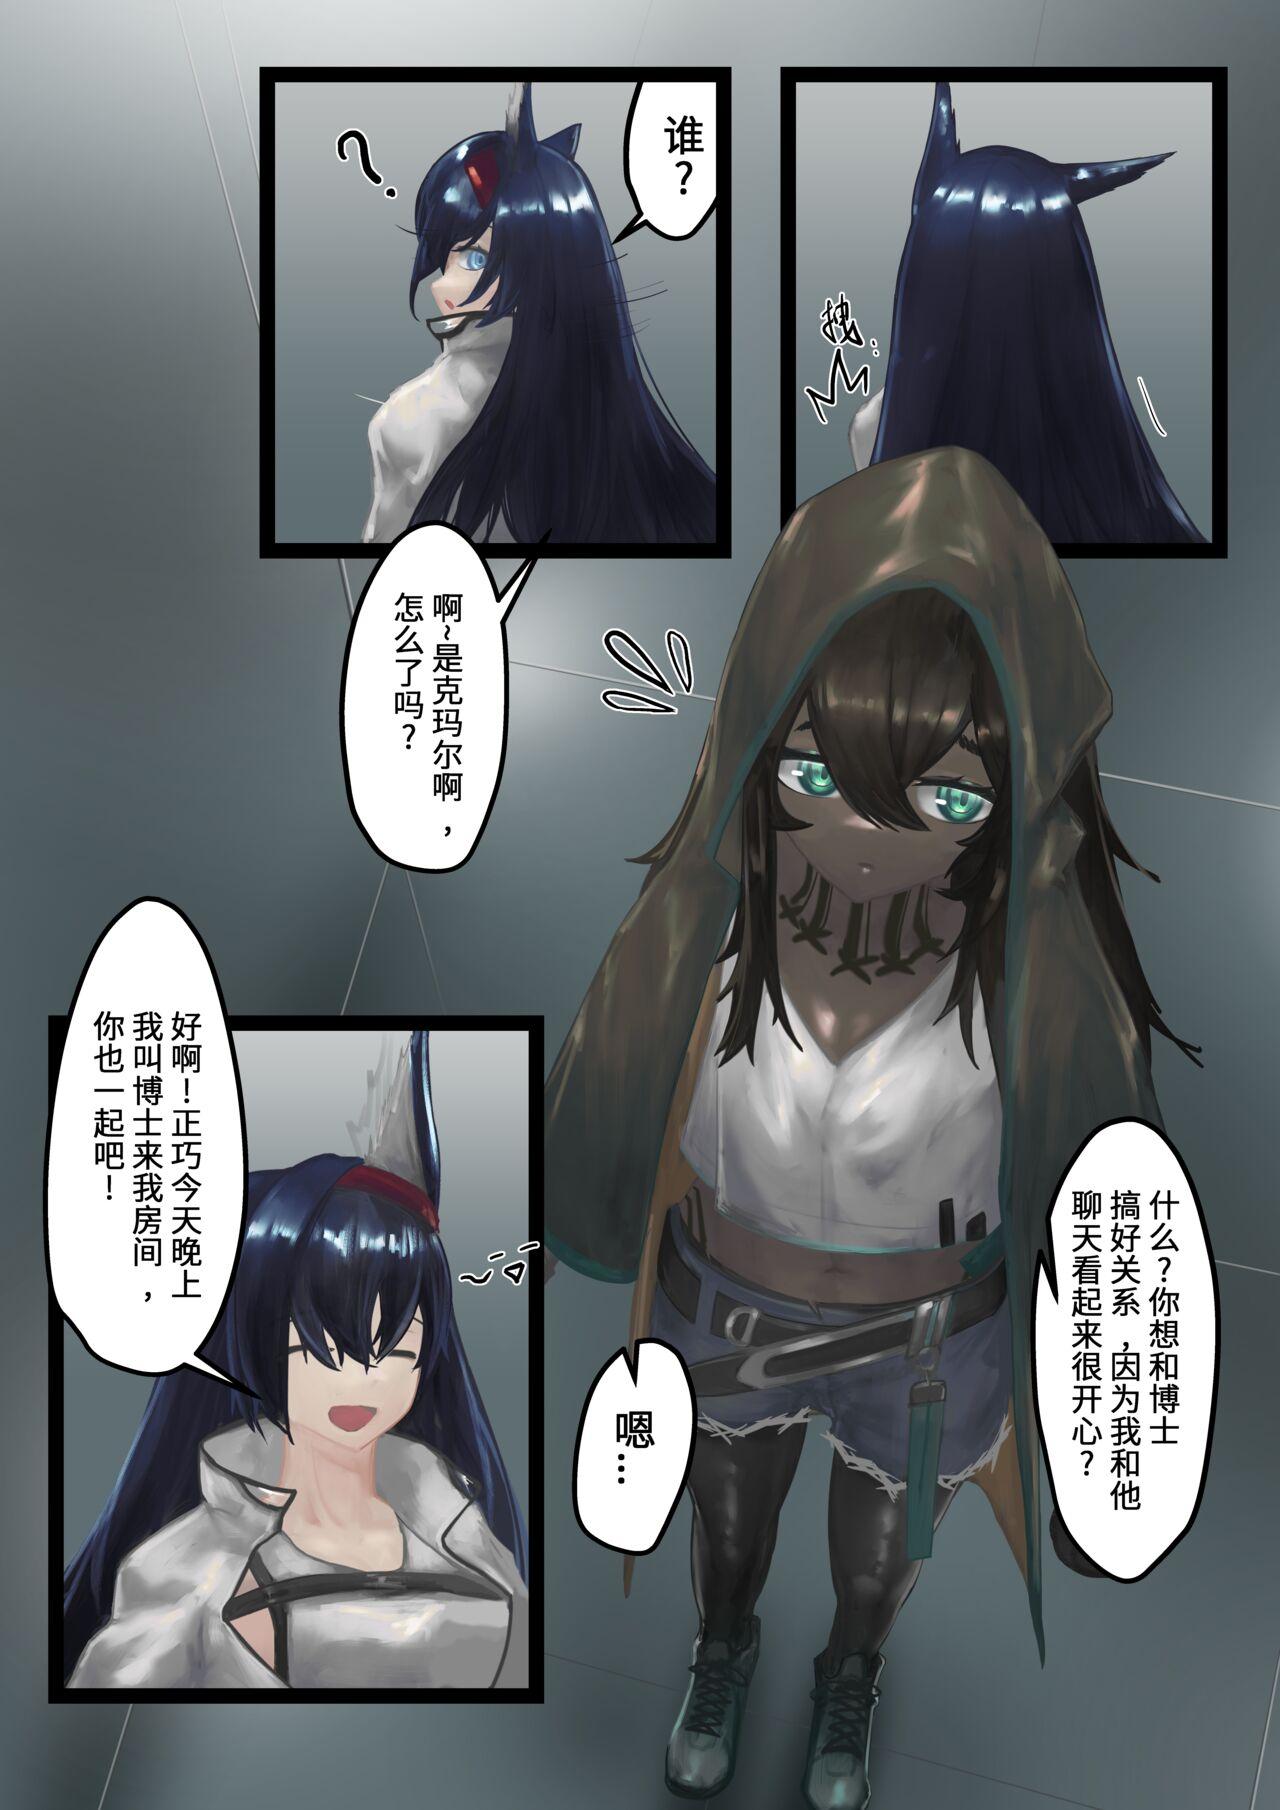 Chaturbate Marknights:蜂鸟沉醉其中 - Arknights Amante - Page 4